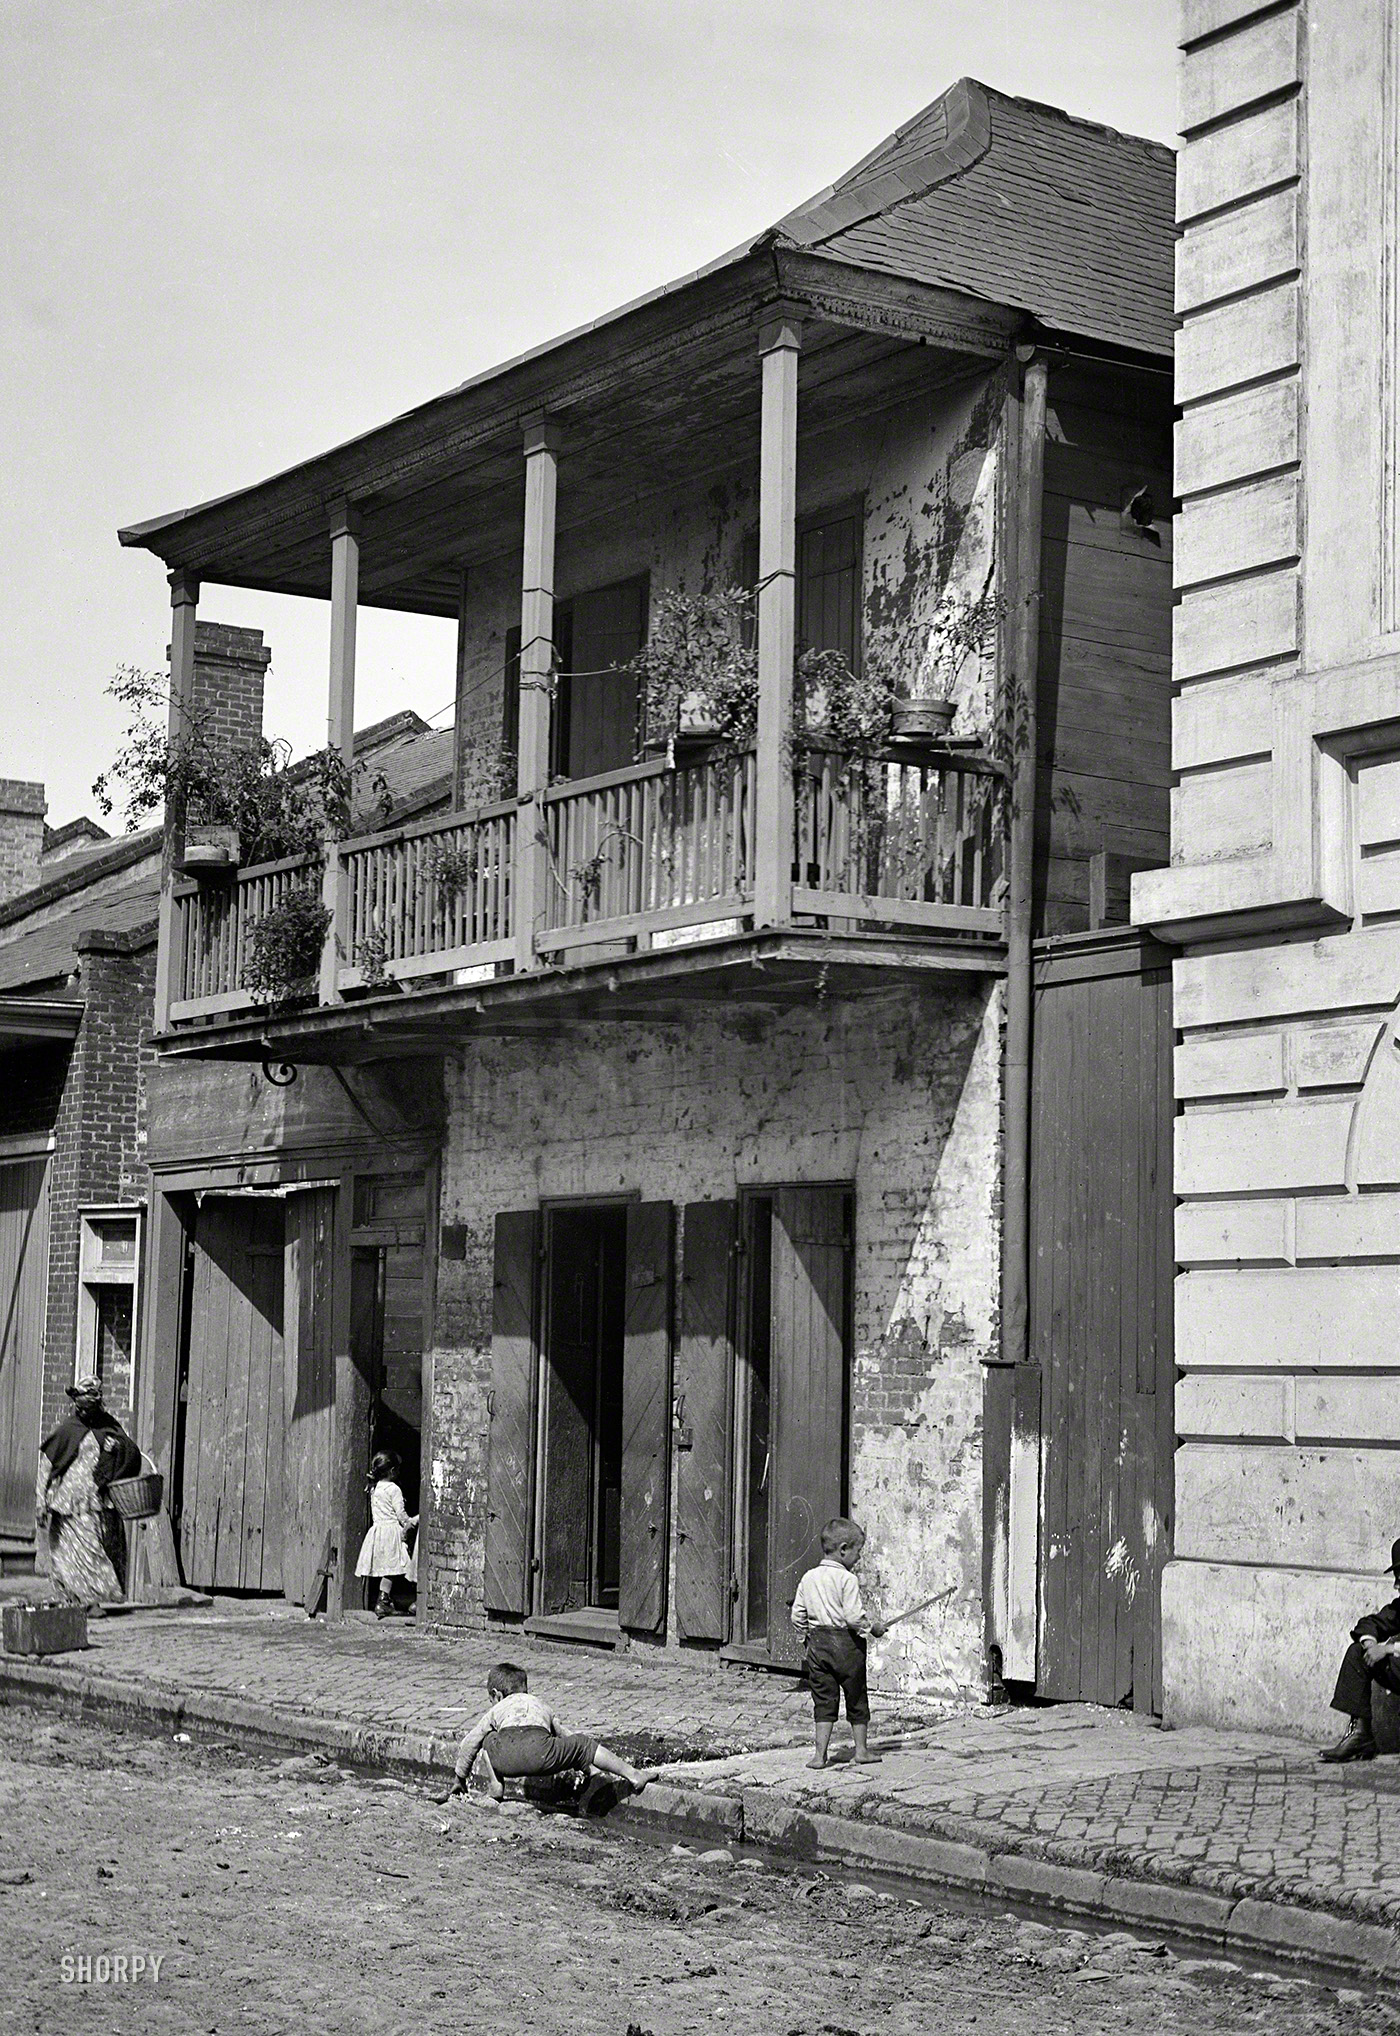 New Orleans circa 1880s-1890s. "Street in the French Quarter." Take care not to trip on the guttersnipes. 5x7 glass negative by William Henry Jackson. Attribution based on Catalogue of the W.H. Jackson Views (1898). View full size.